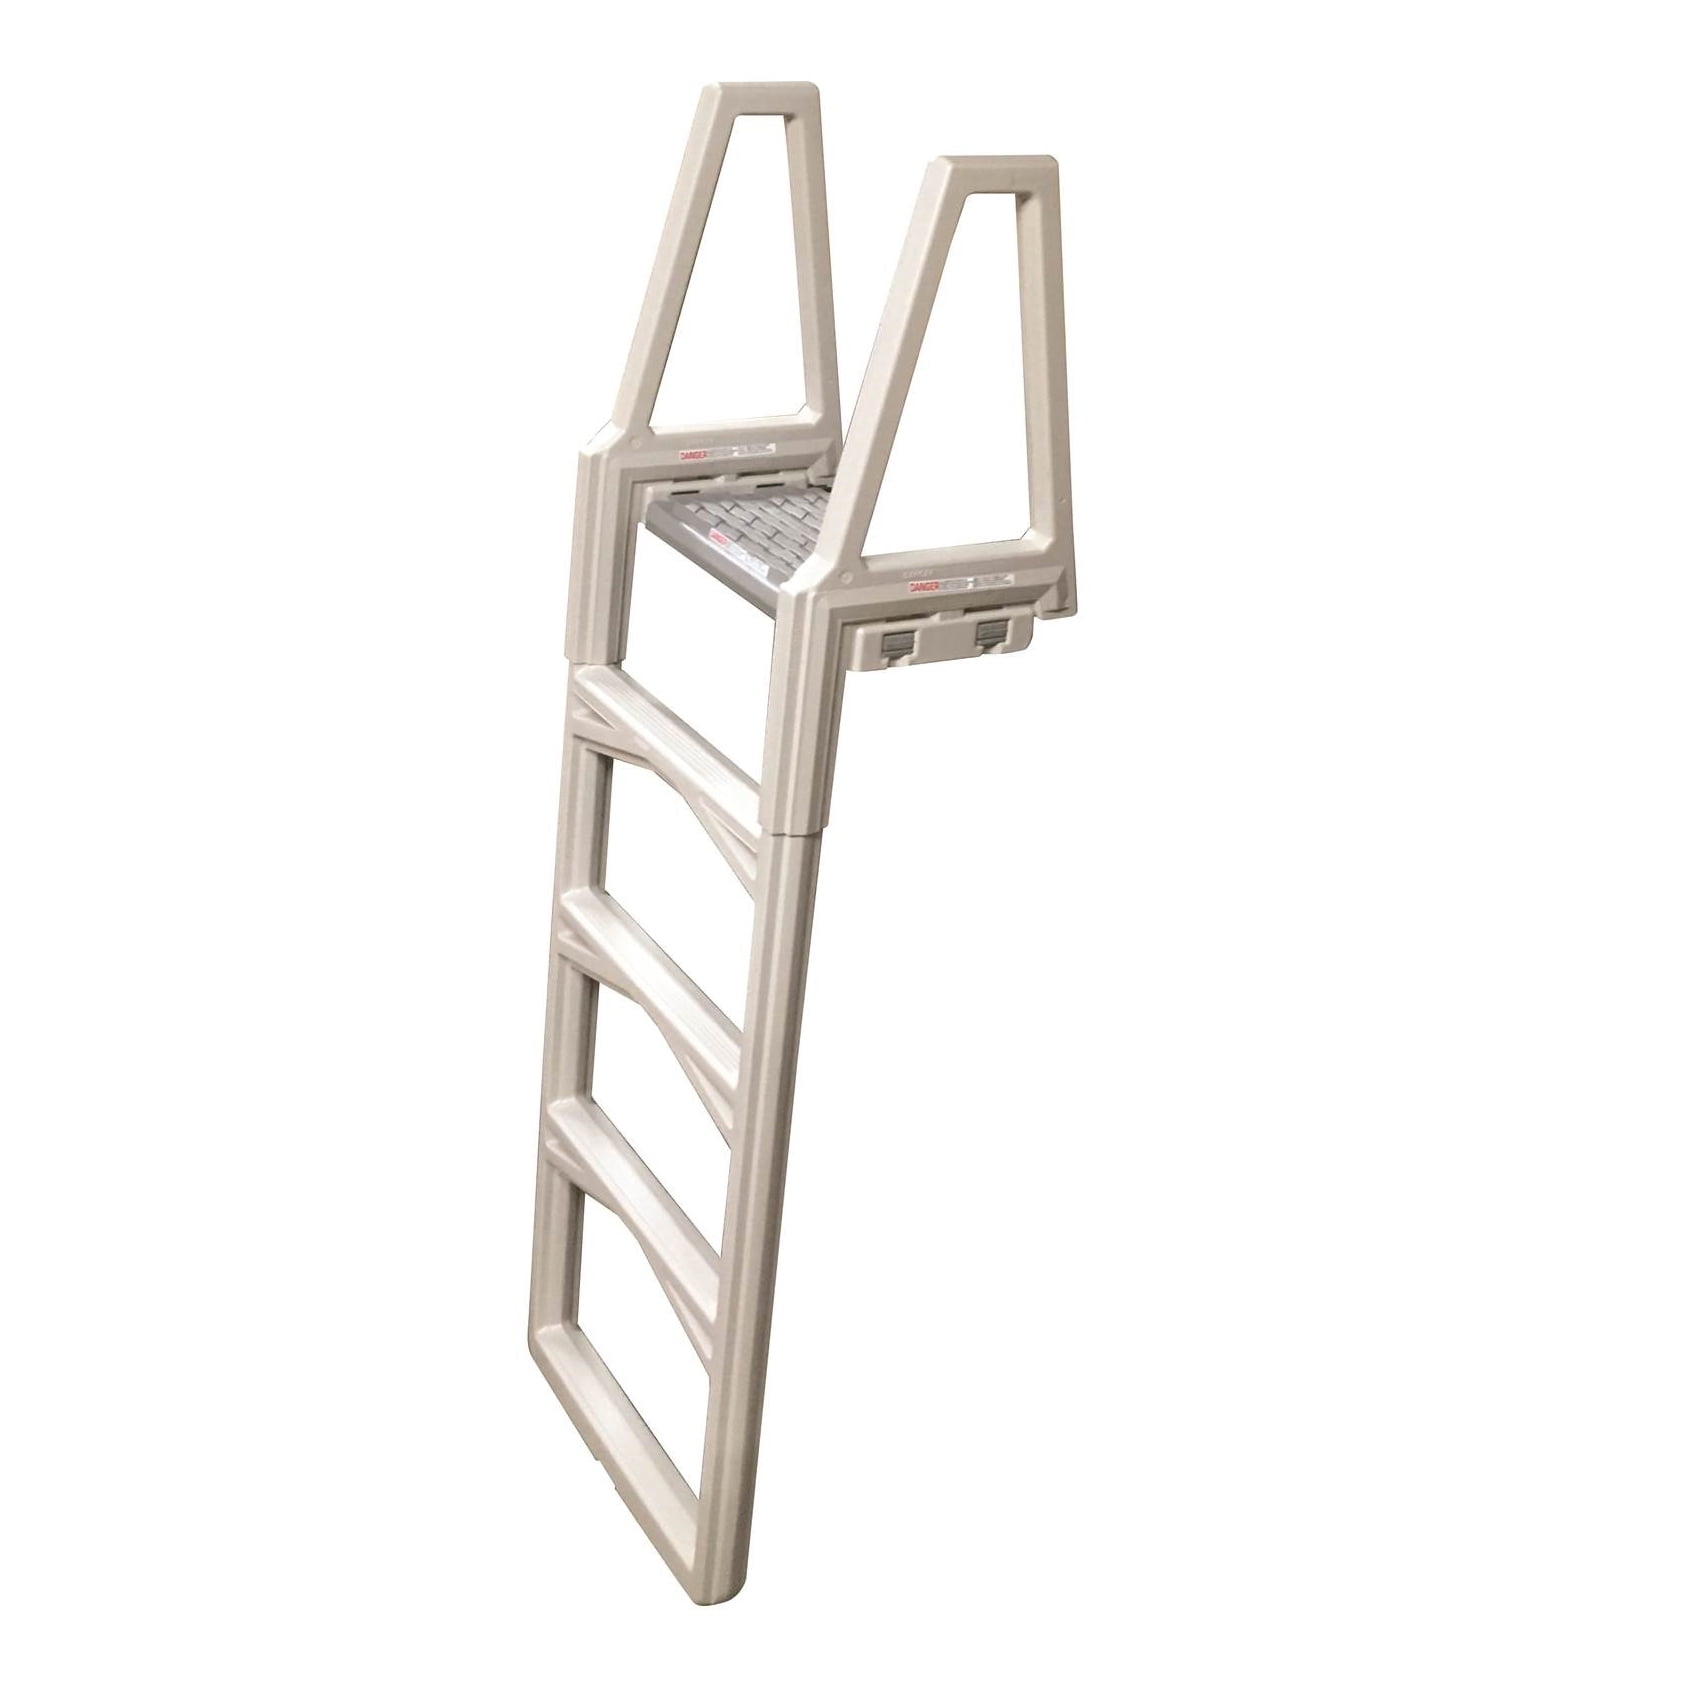 New CONFER 635-52 In-Pool Economy Above Ground Swimming Pool Ladder 48-56 Pad 